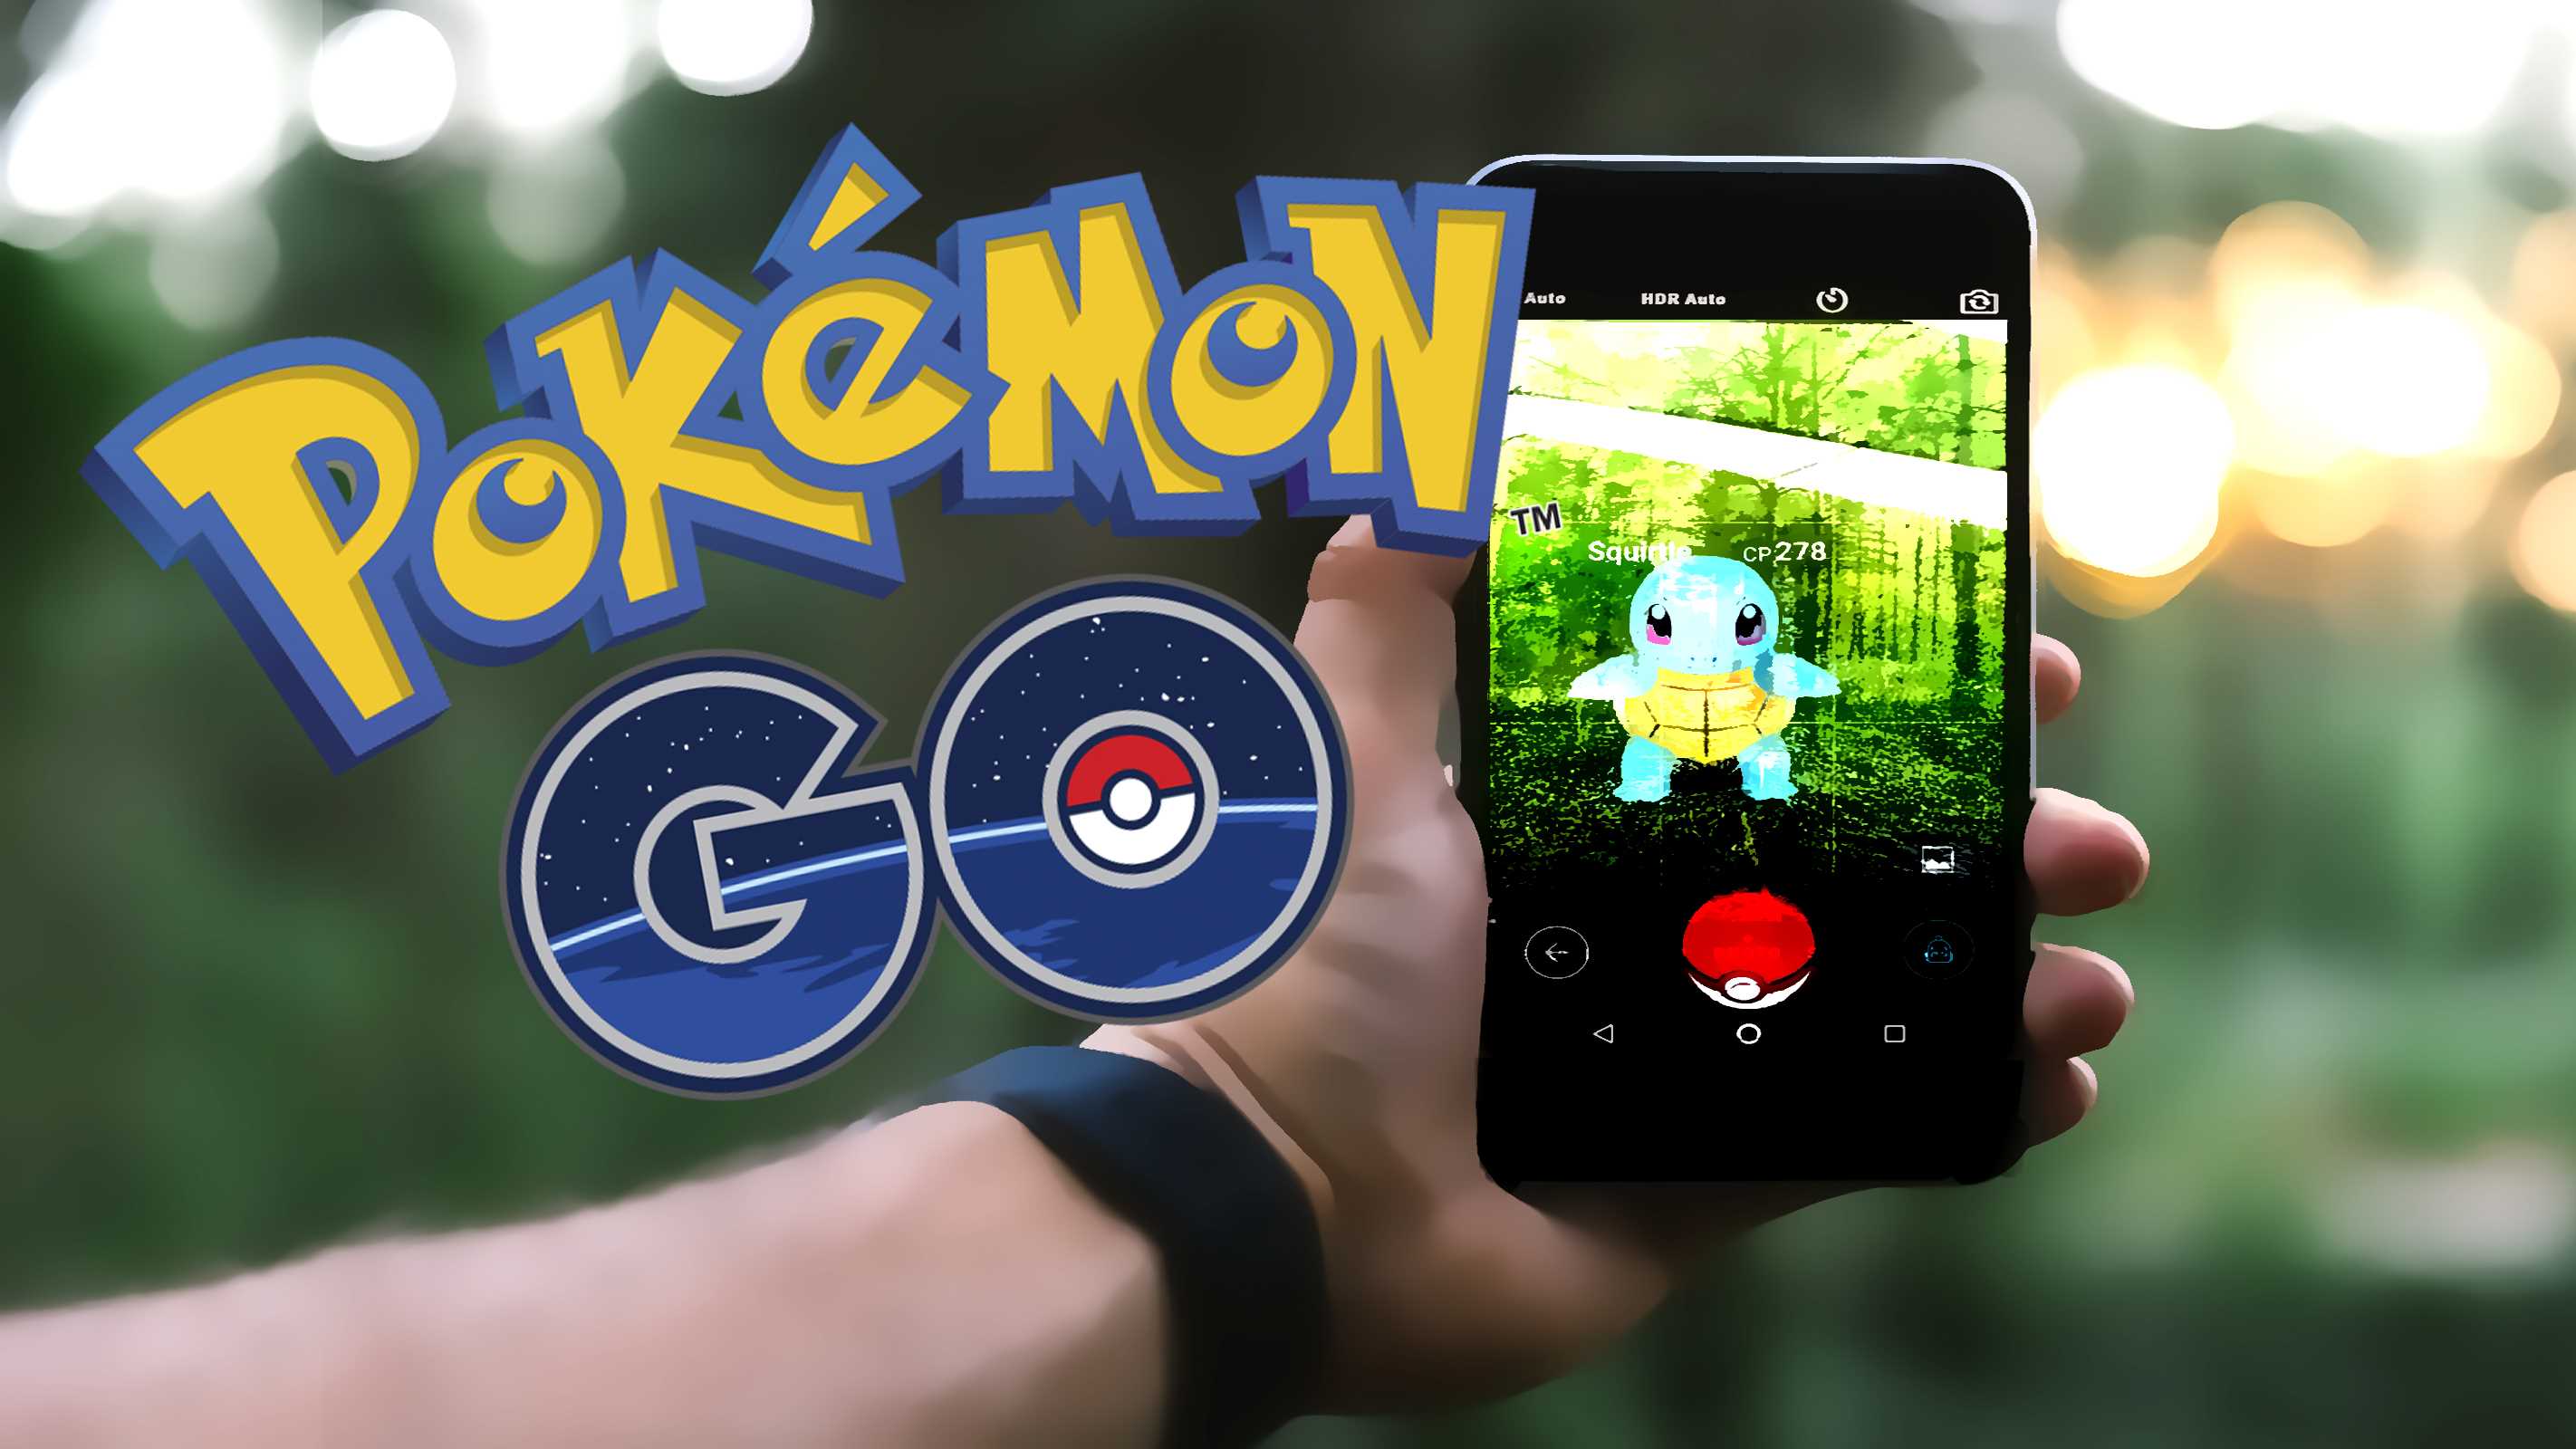 Pokémon Go pros and cons: is it a good game? - netivist2844 x 1600